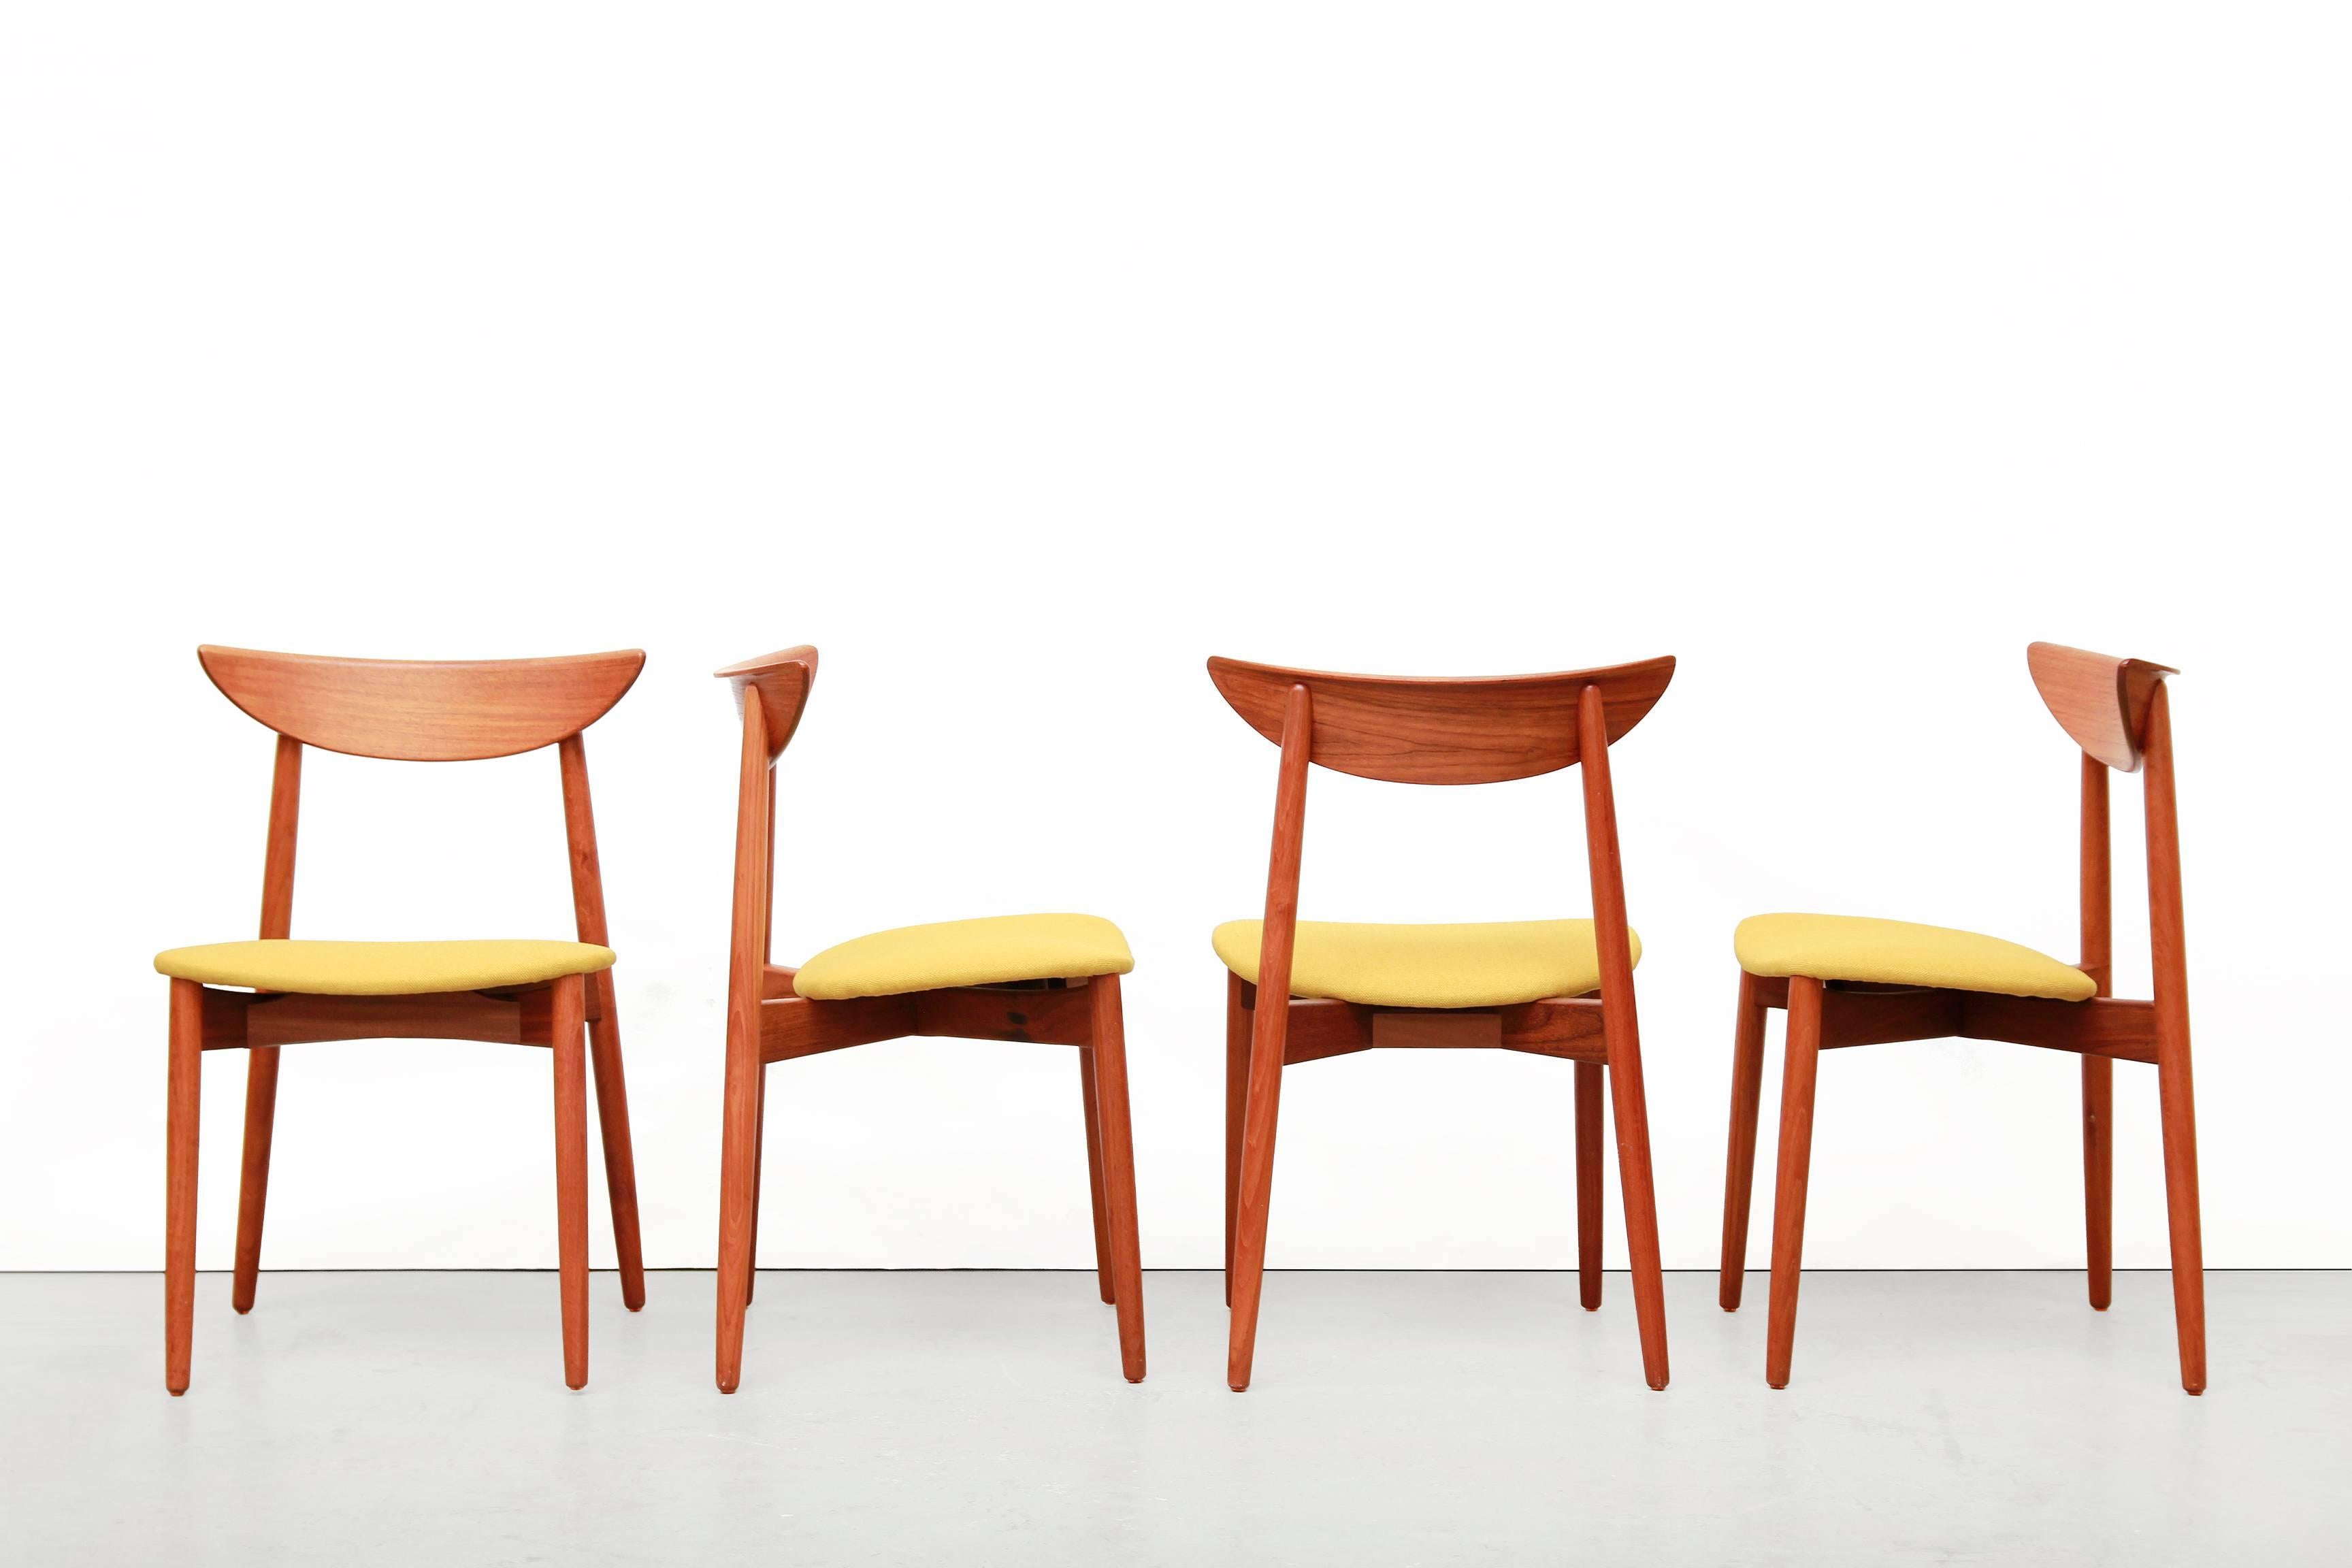 Nice set of four Harry Ostergaard dining chairs produced by Randers Mobelfabrik, Denmark in the early 1960s. These airy designed chairs are made of solid teak with beautifully handcrafted wood connections. These chairs are of high quality. The